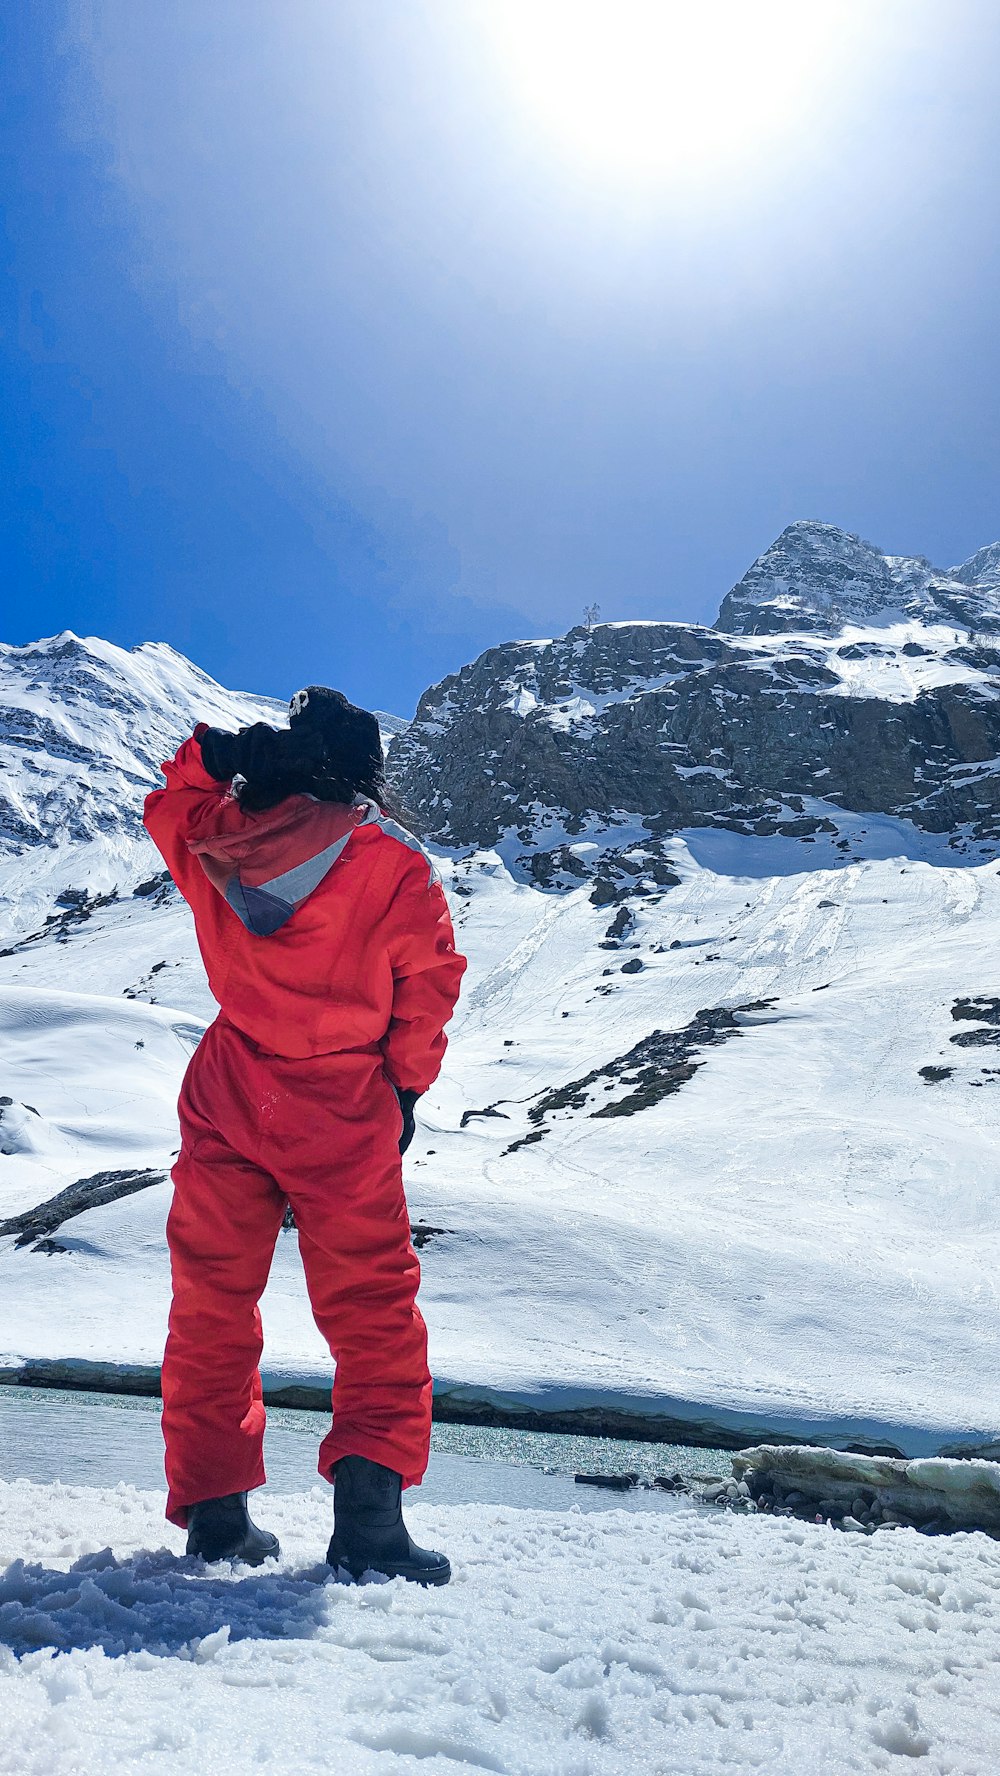 a person standing on a snowy mountain